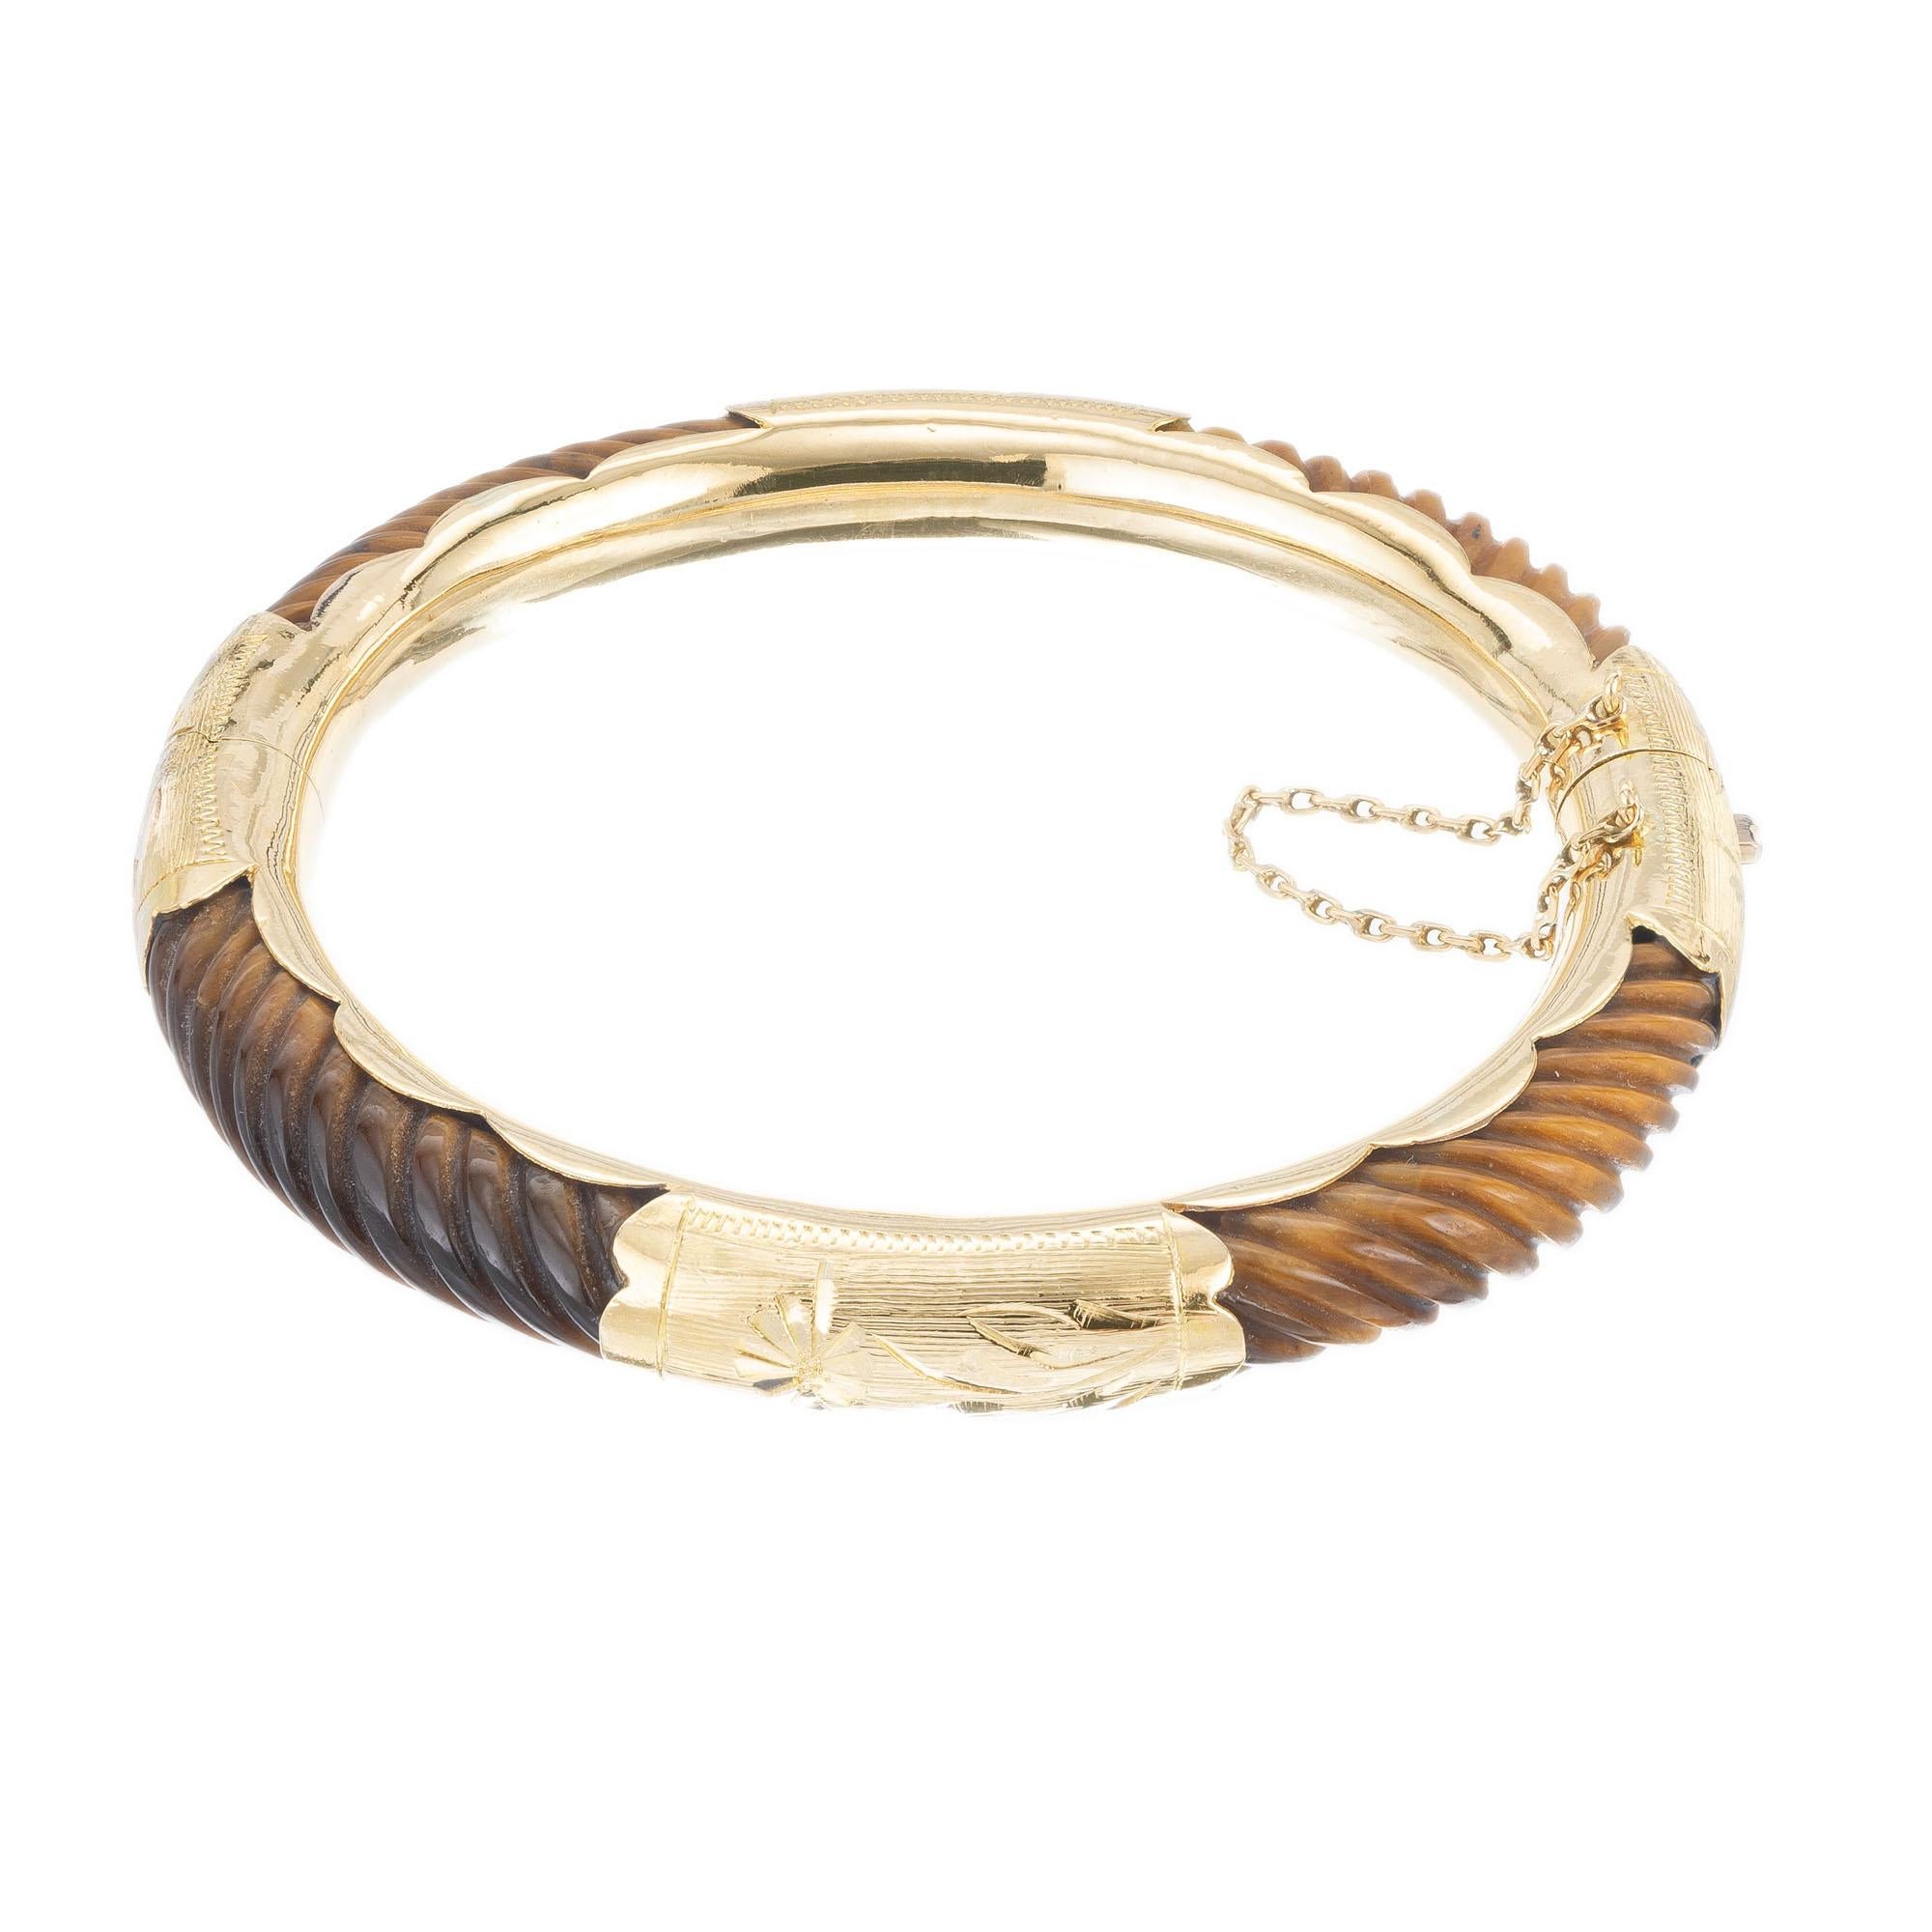 1960's Four section curved tiger eye and 14k yellow gold hand engraved bangle bracelet with safety chain. Circa 1960.  7-7.5 Length.  

Diagonally corrugated tigers eye
14k yellow gold
Stamped: 585 14k
25.3 grams
Width: 8.0mm 
Thickness/depth: